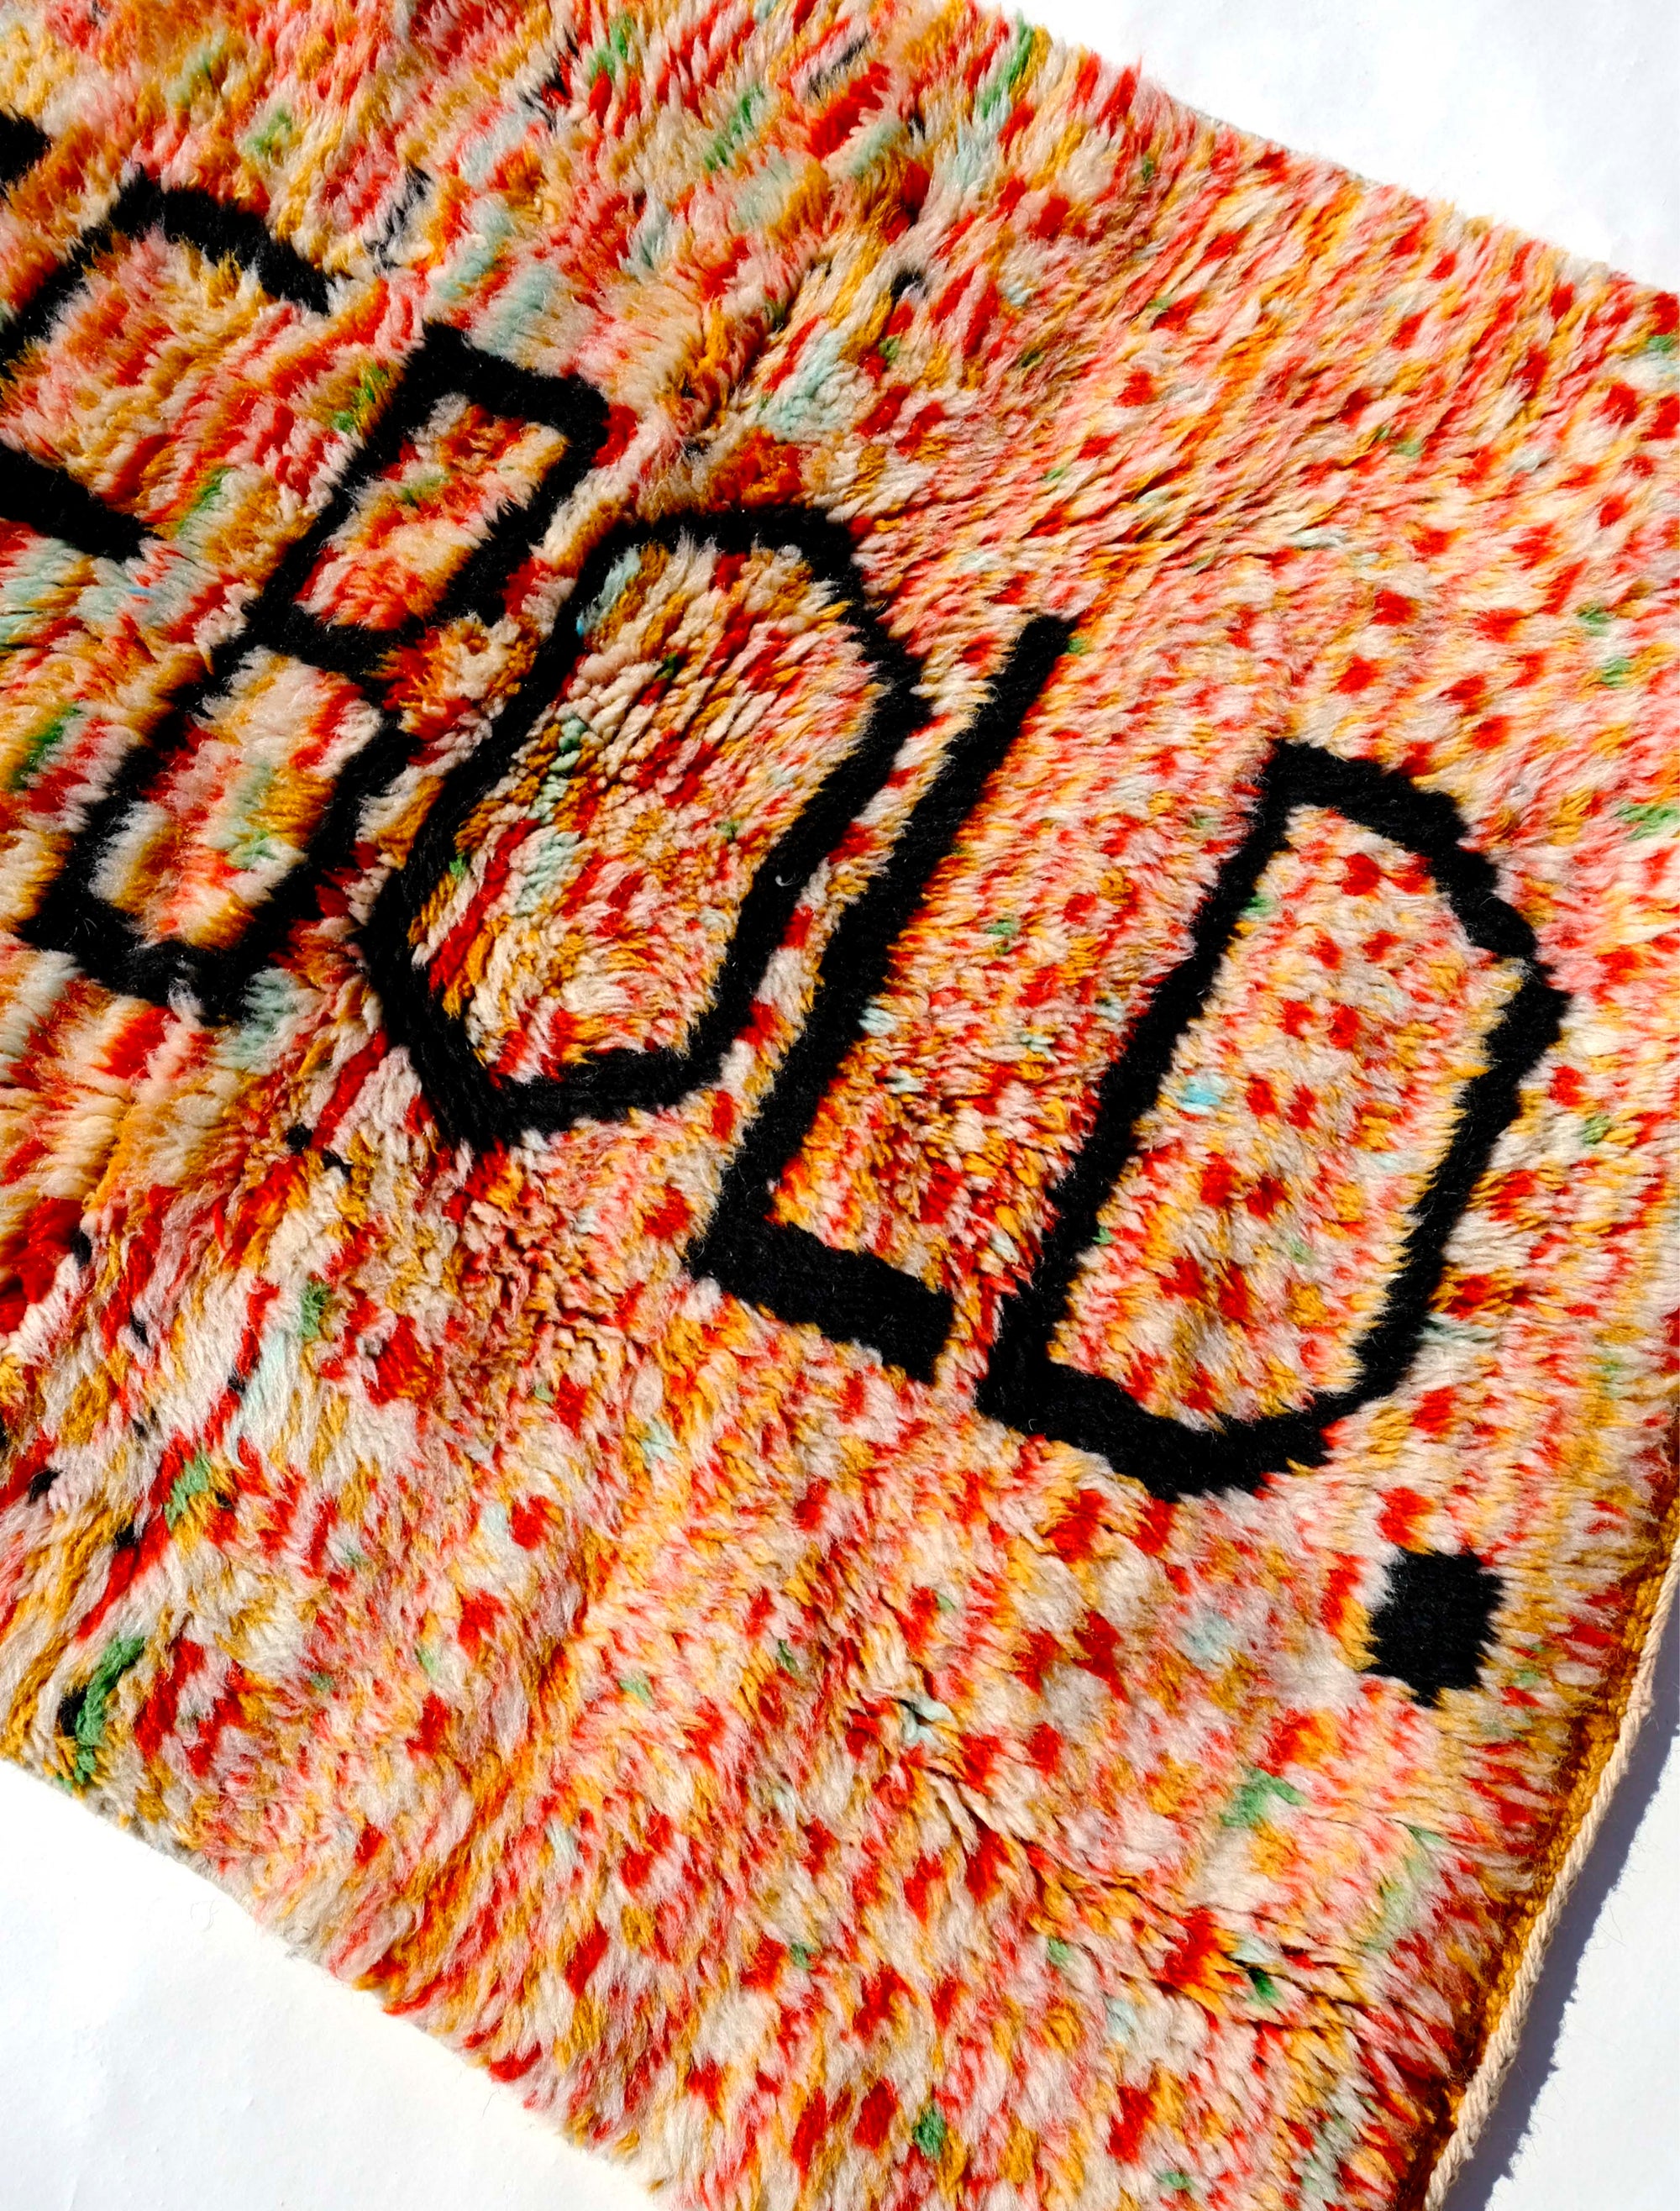 Elevate your space with the 'Tangerine Radiance Rug.' Handmade in the Atlas Mountains, this vibrant rug features a unique checkerboard pattern in warm tangerine tones. The focal point, proclaiming 'BE BOLD' in black letters, adds a touch of inspiration. With a fuzzy texture and meticulous craftsmanship, this rug brings warmth and positive energy to any room.  Size: 80 x 120cm / 31 x 47in 